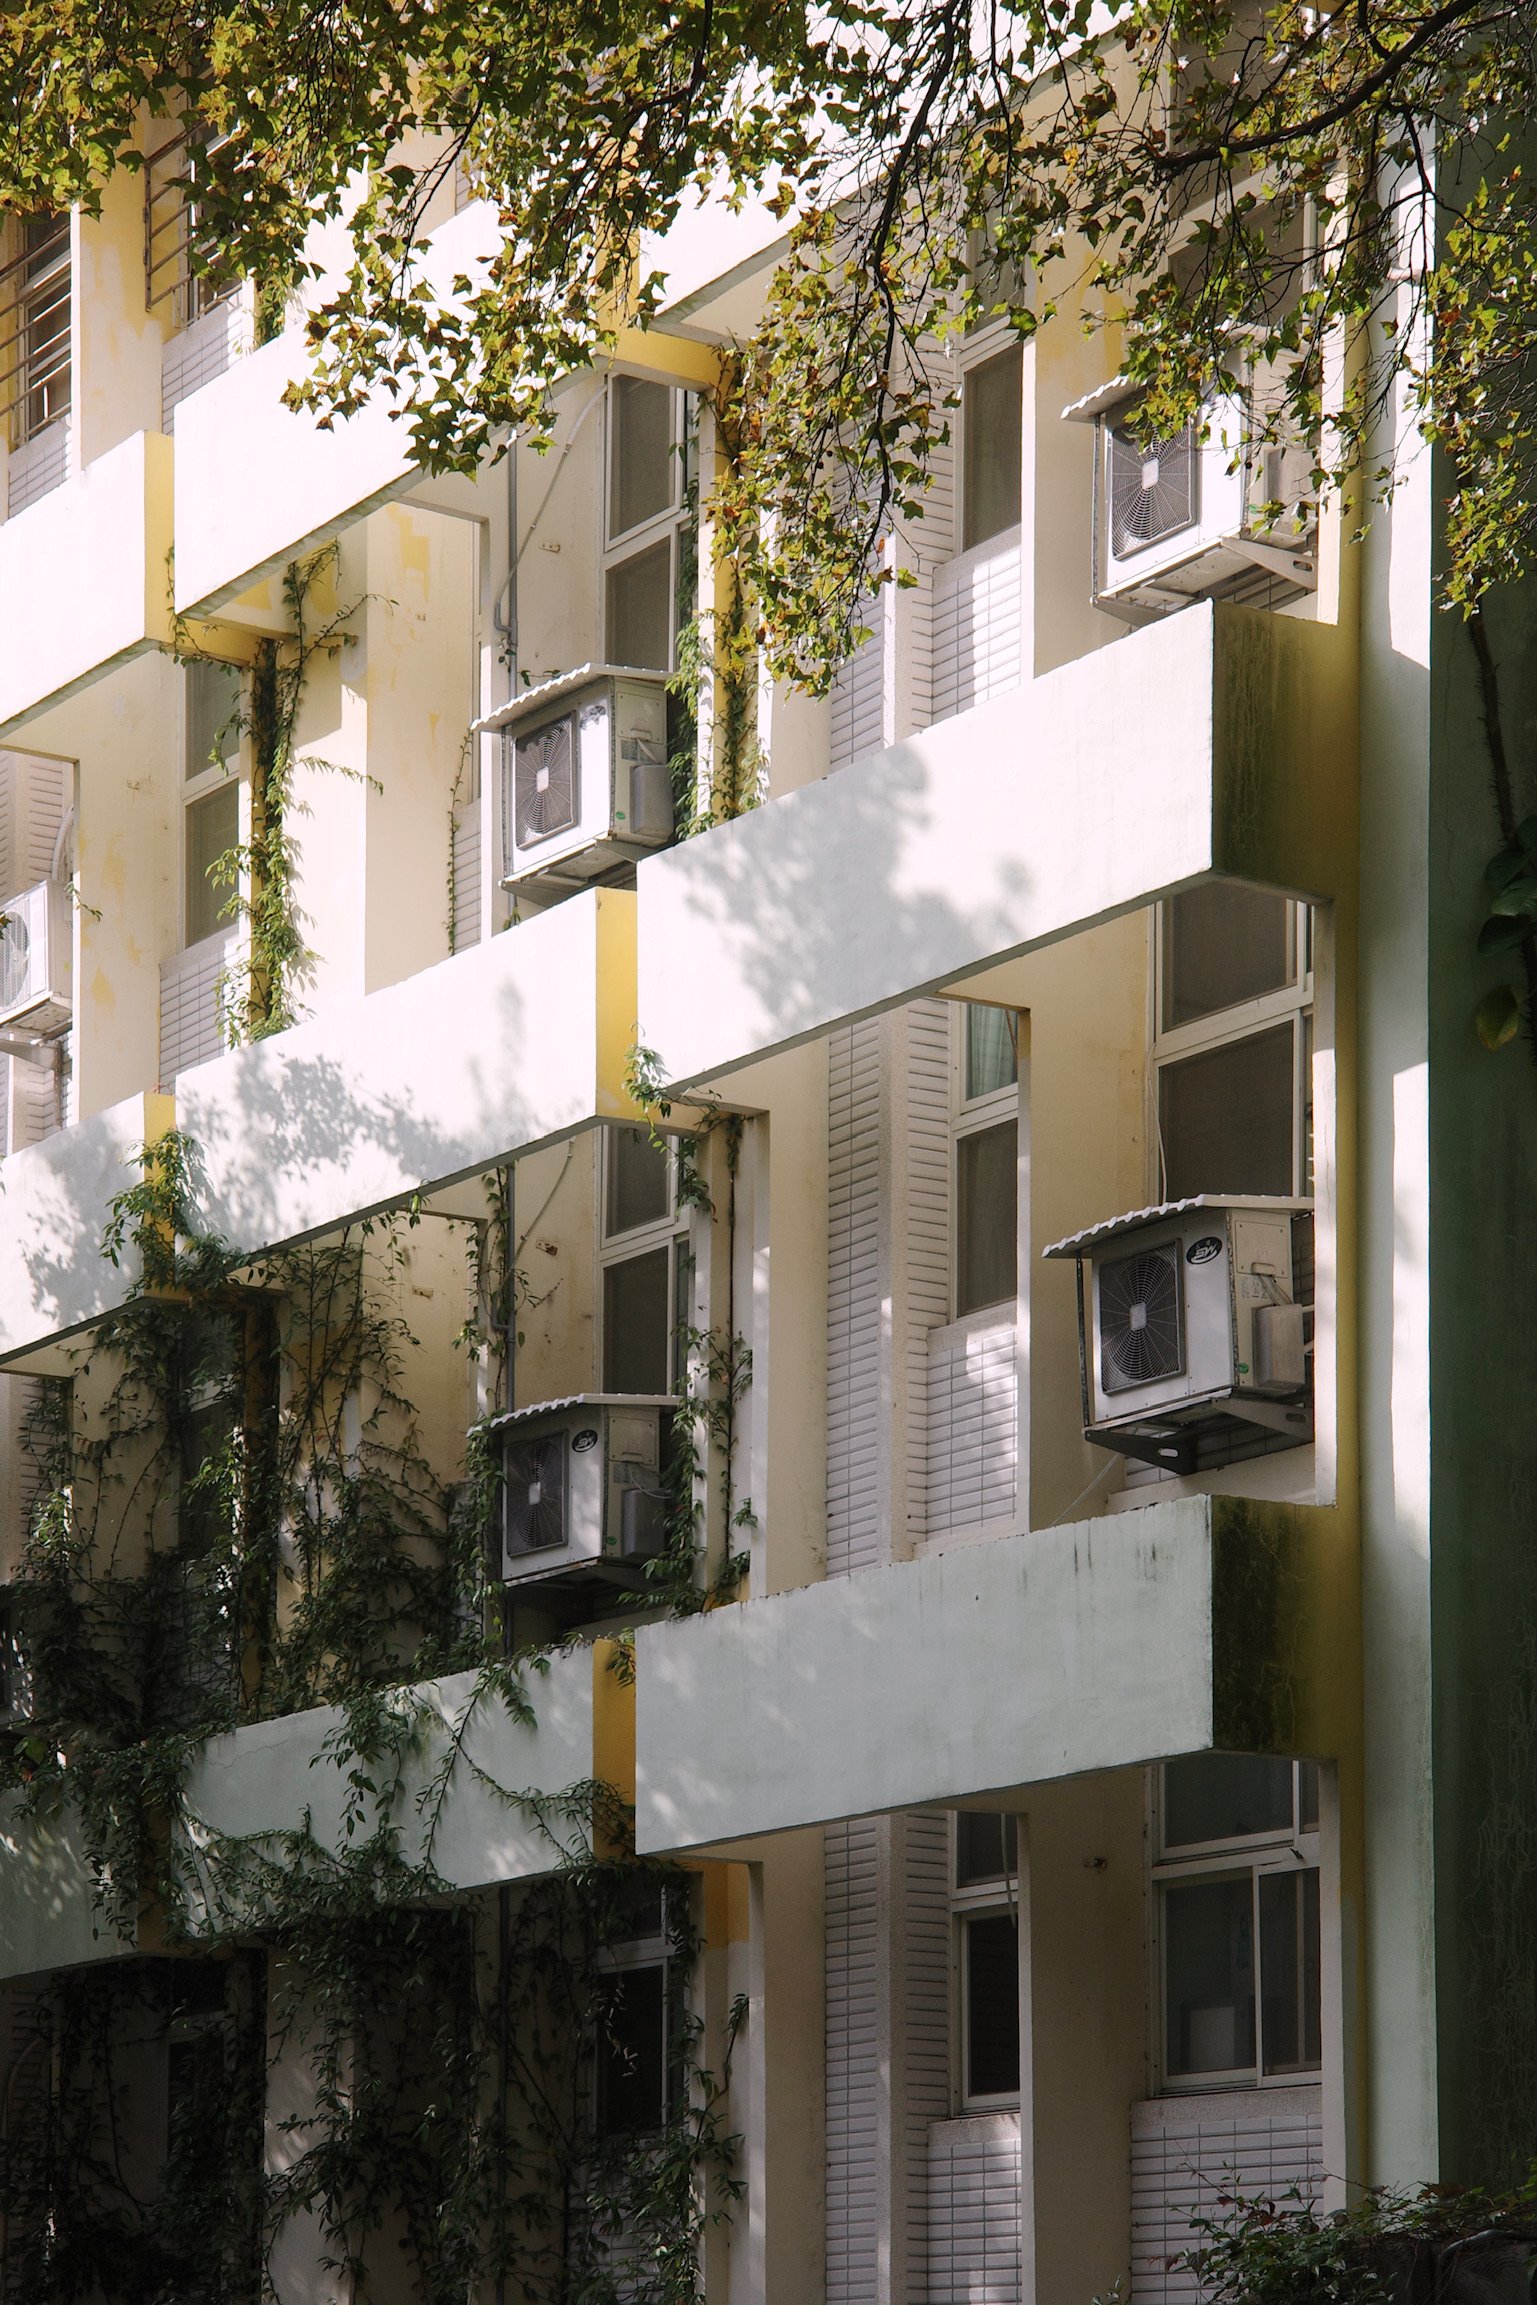 Building with white, yellow, green tiles and outdoor AC units and plants growing around the outside wall.